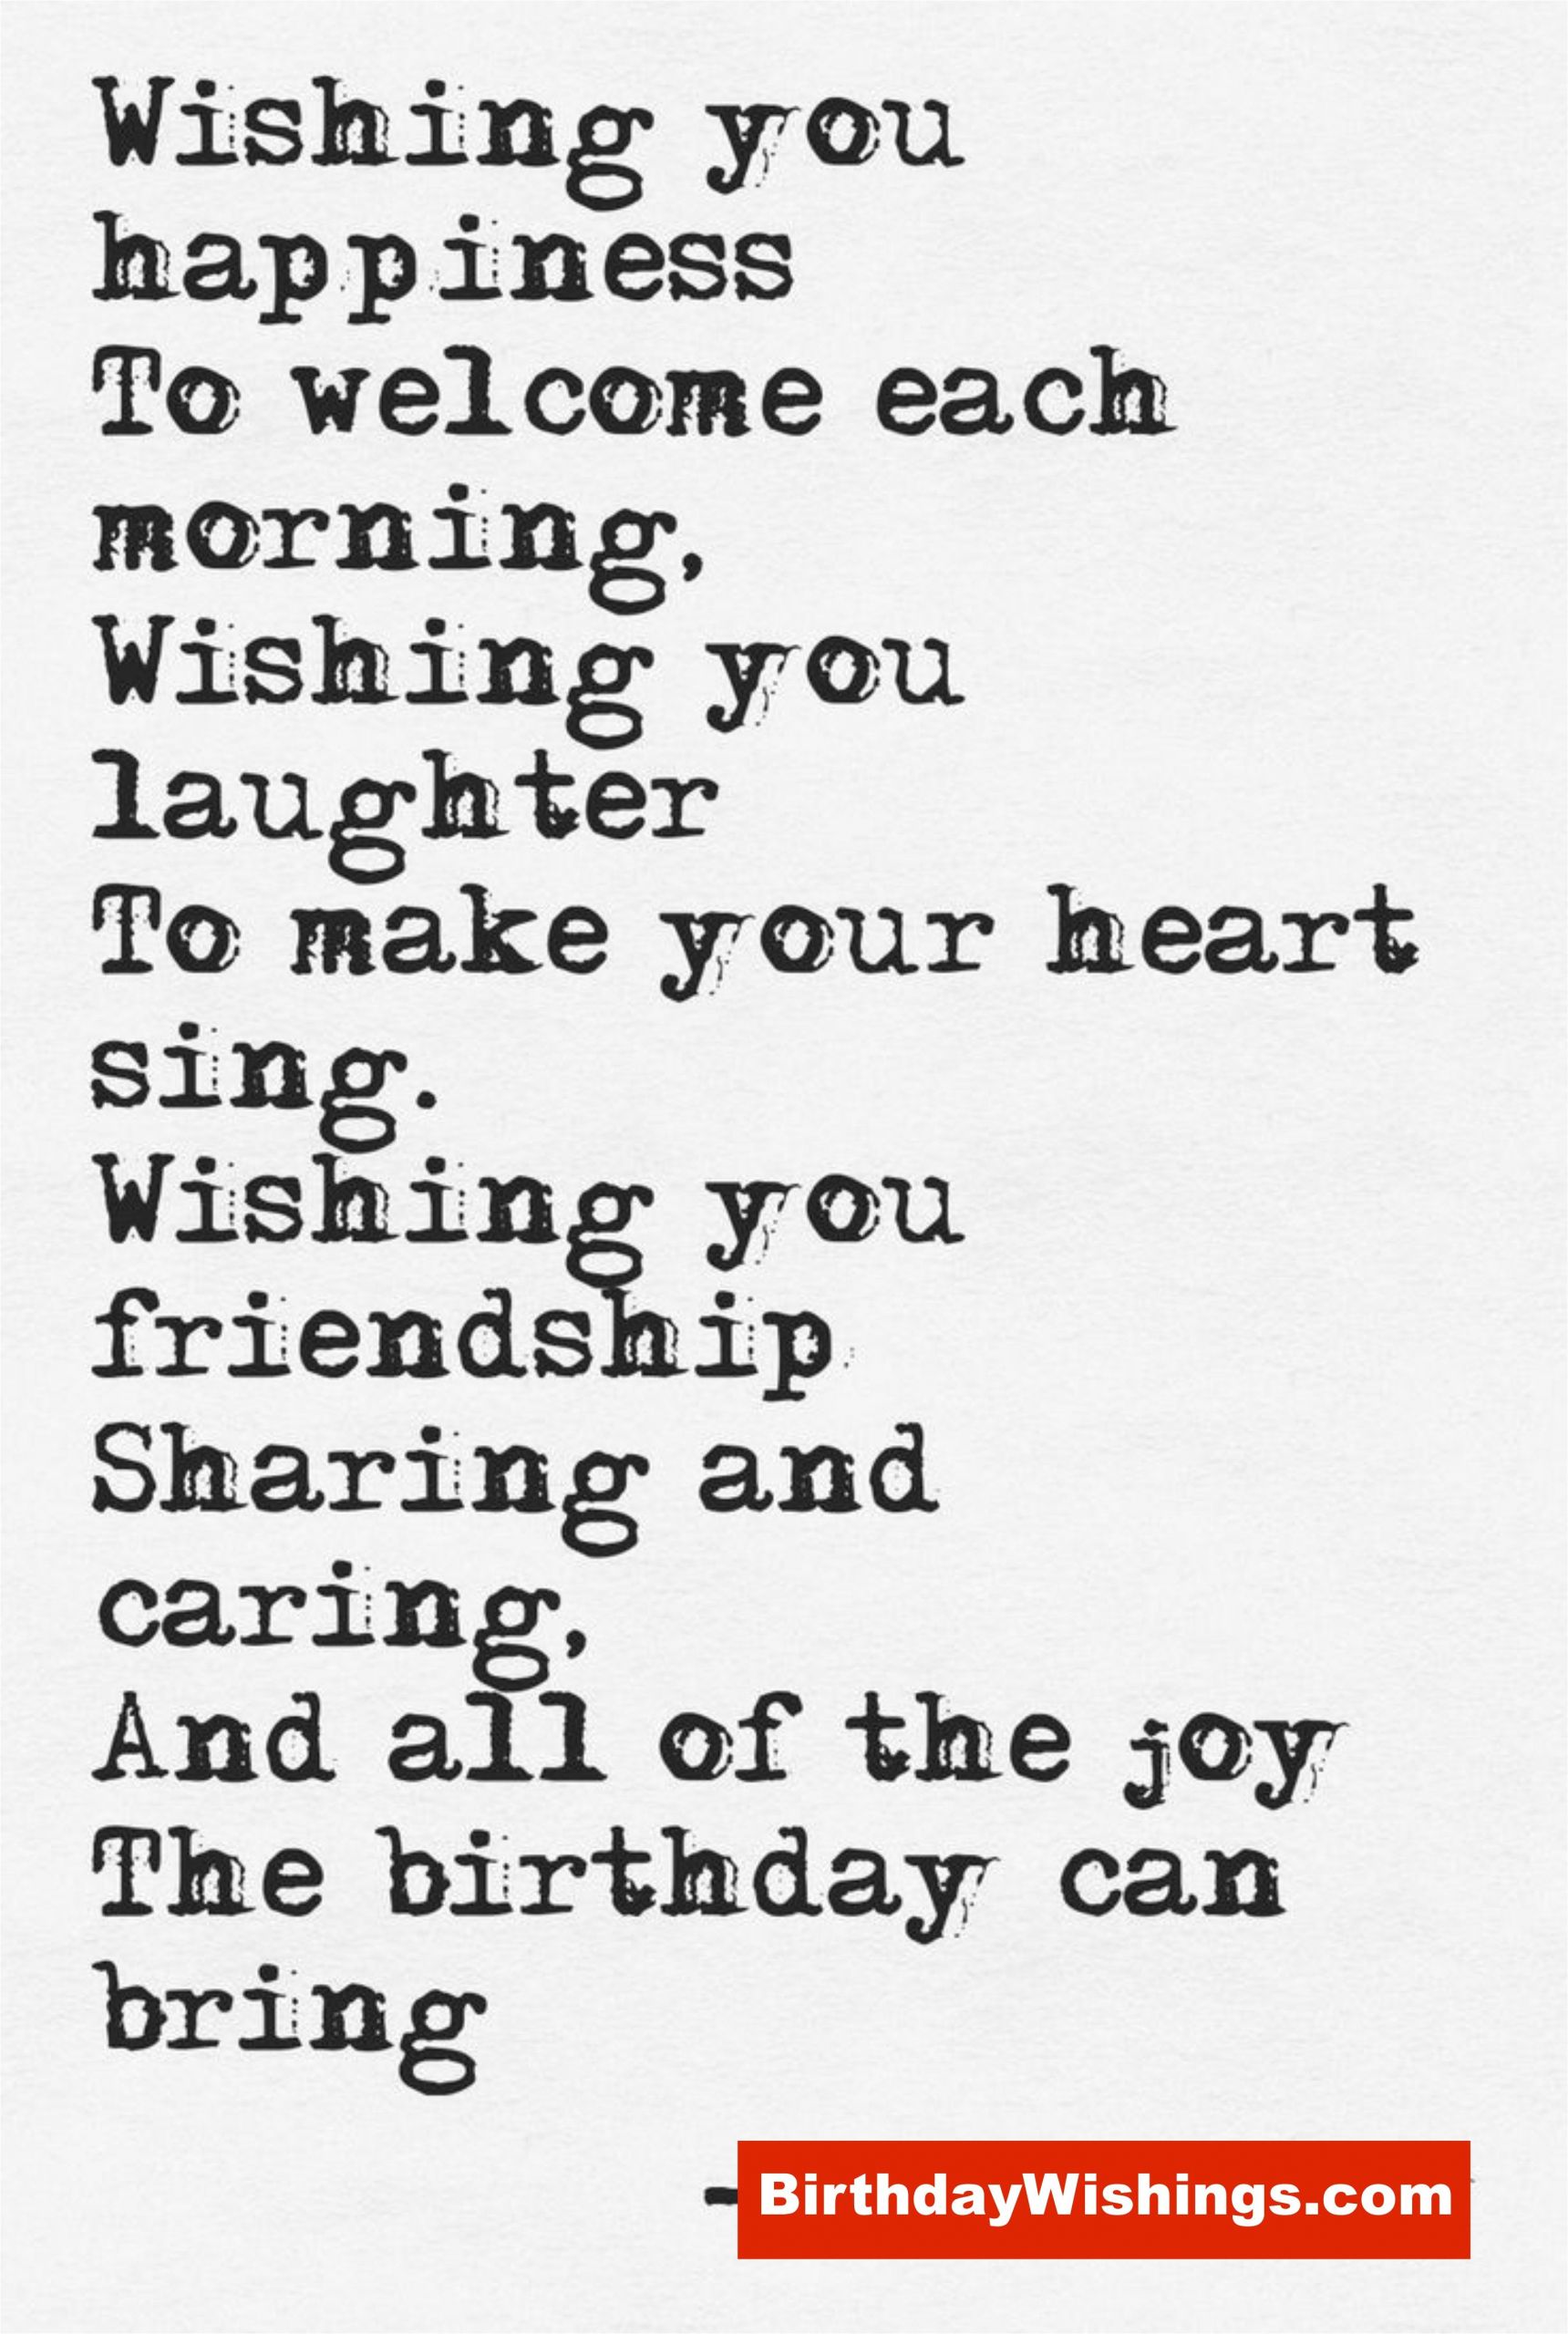 Birthday Card Quotes for Friend Birthday Wishes for Best Friend with Images Happy